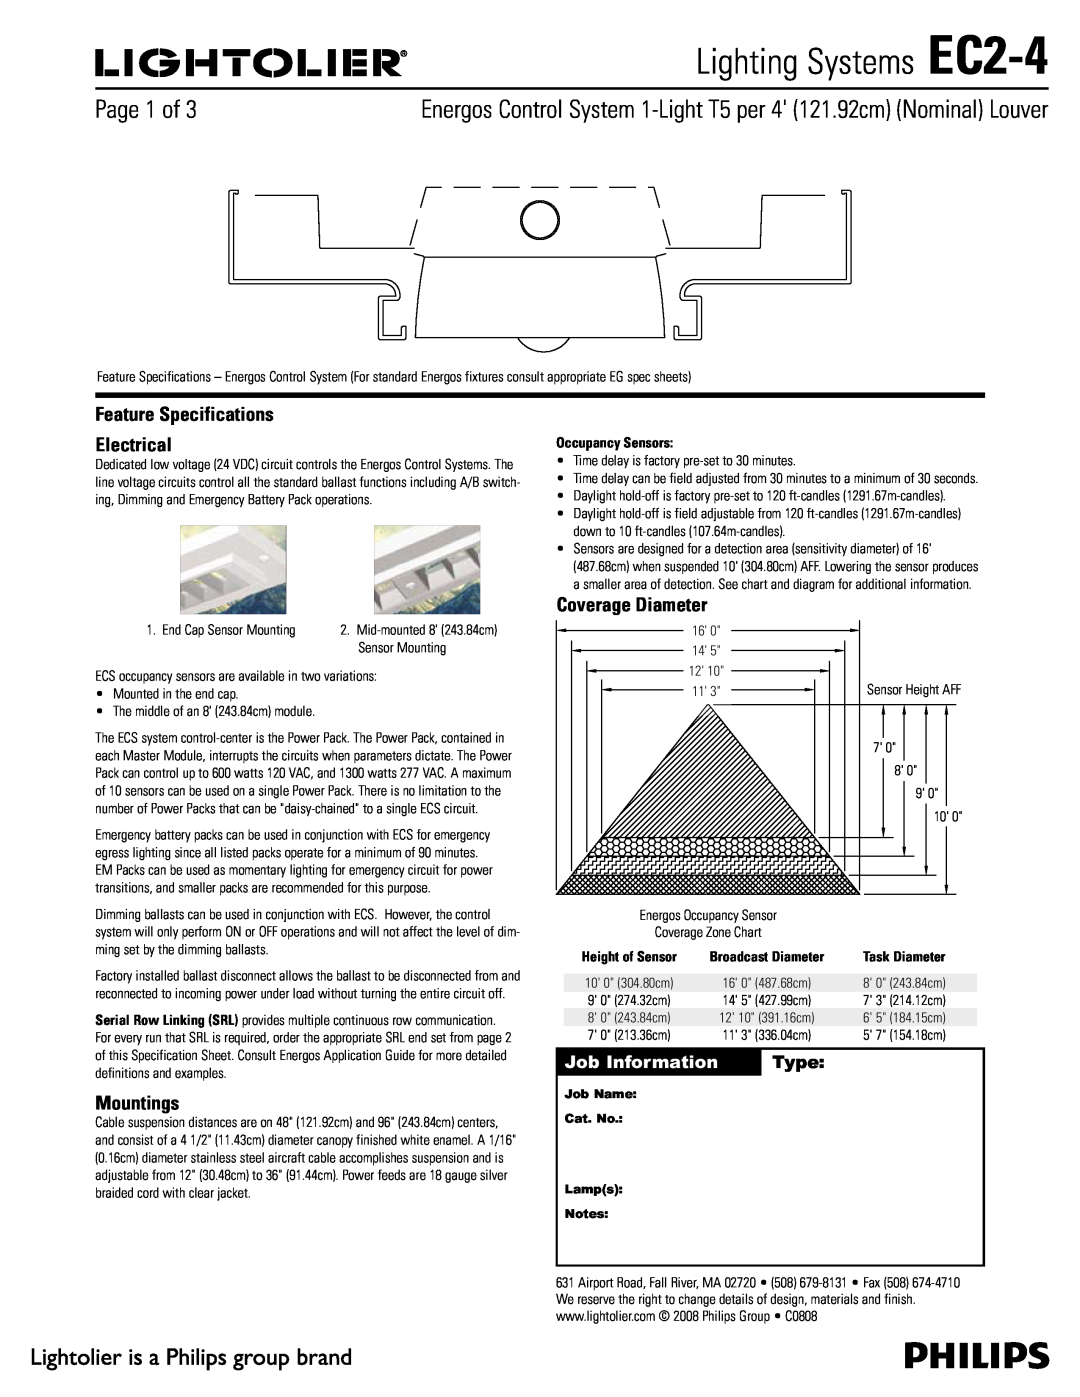 Lightolier specifications Lighting Systems EC2-4, Feature Specifications Electrical, Mountings, Coverage Diameter, Type 